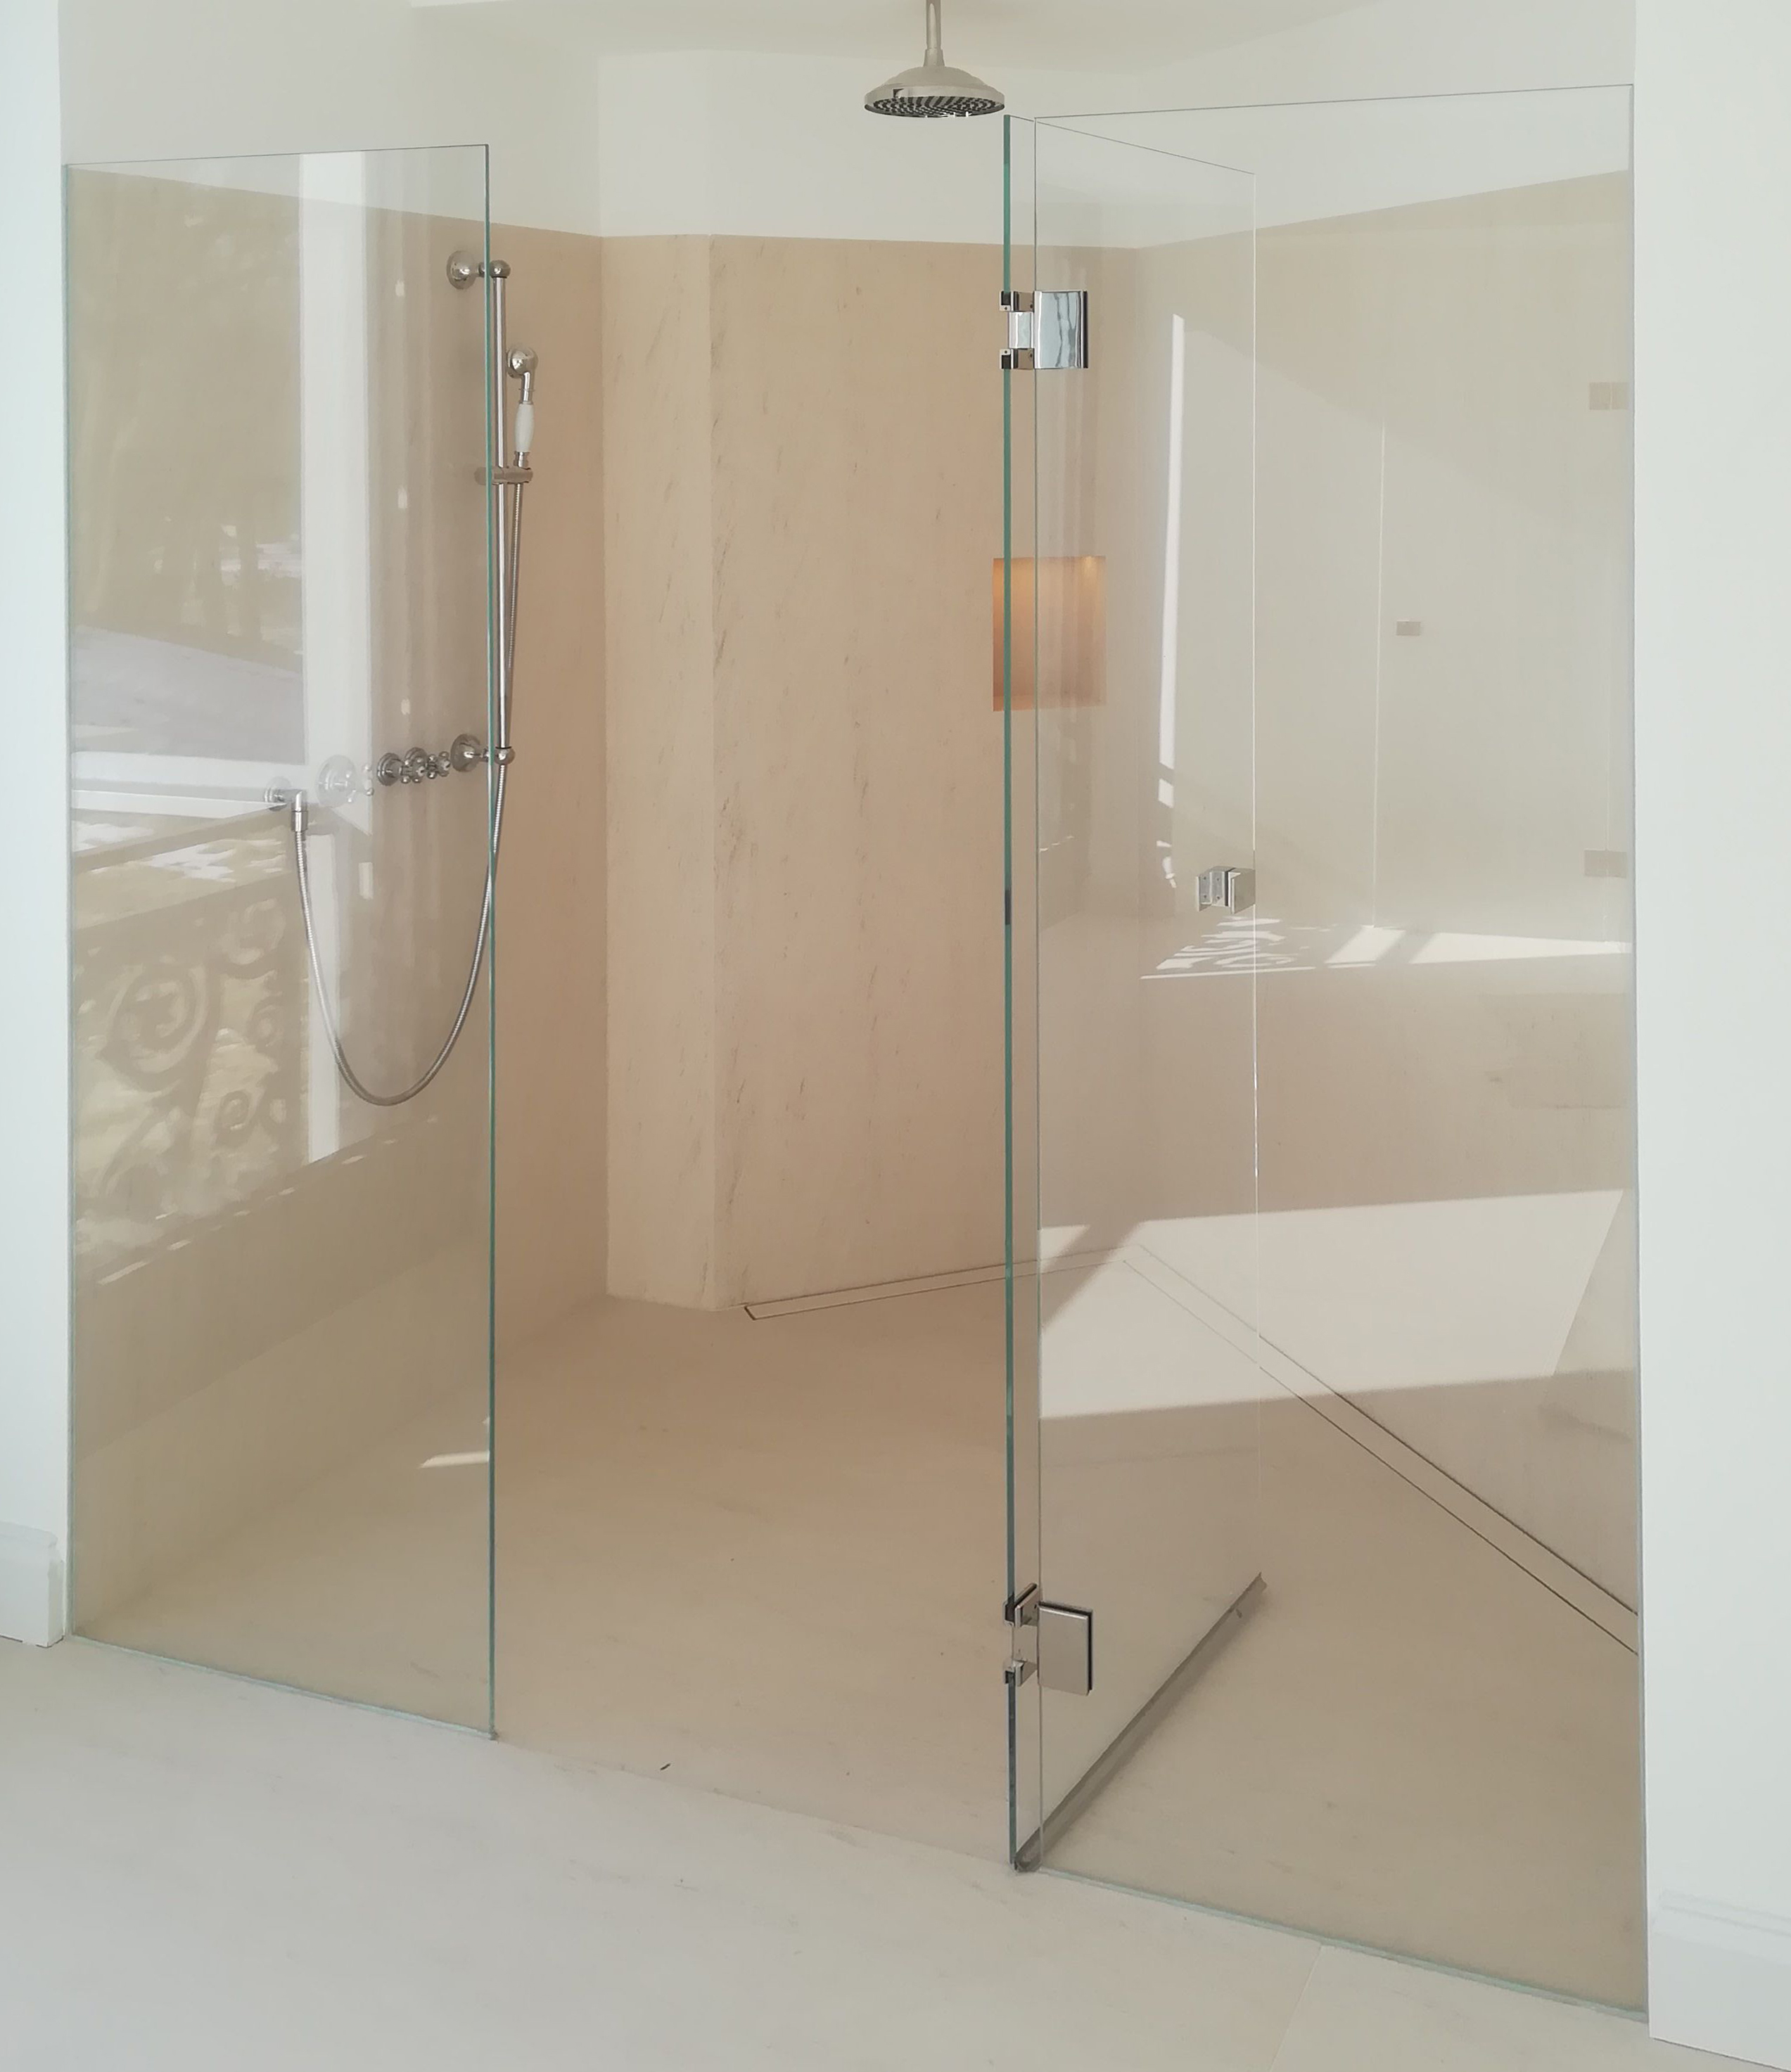 Shower partitions made of glass